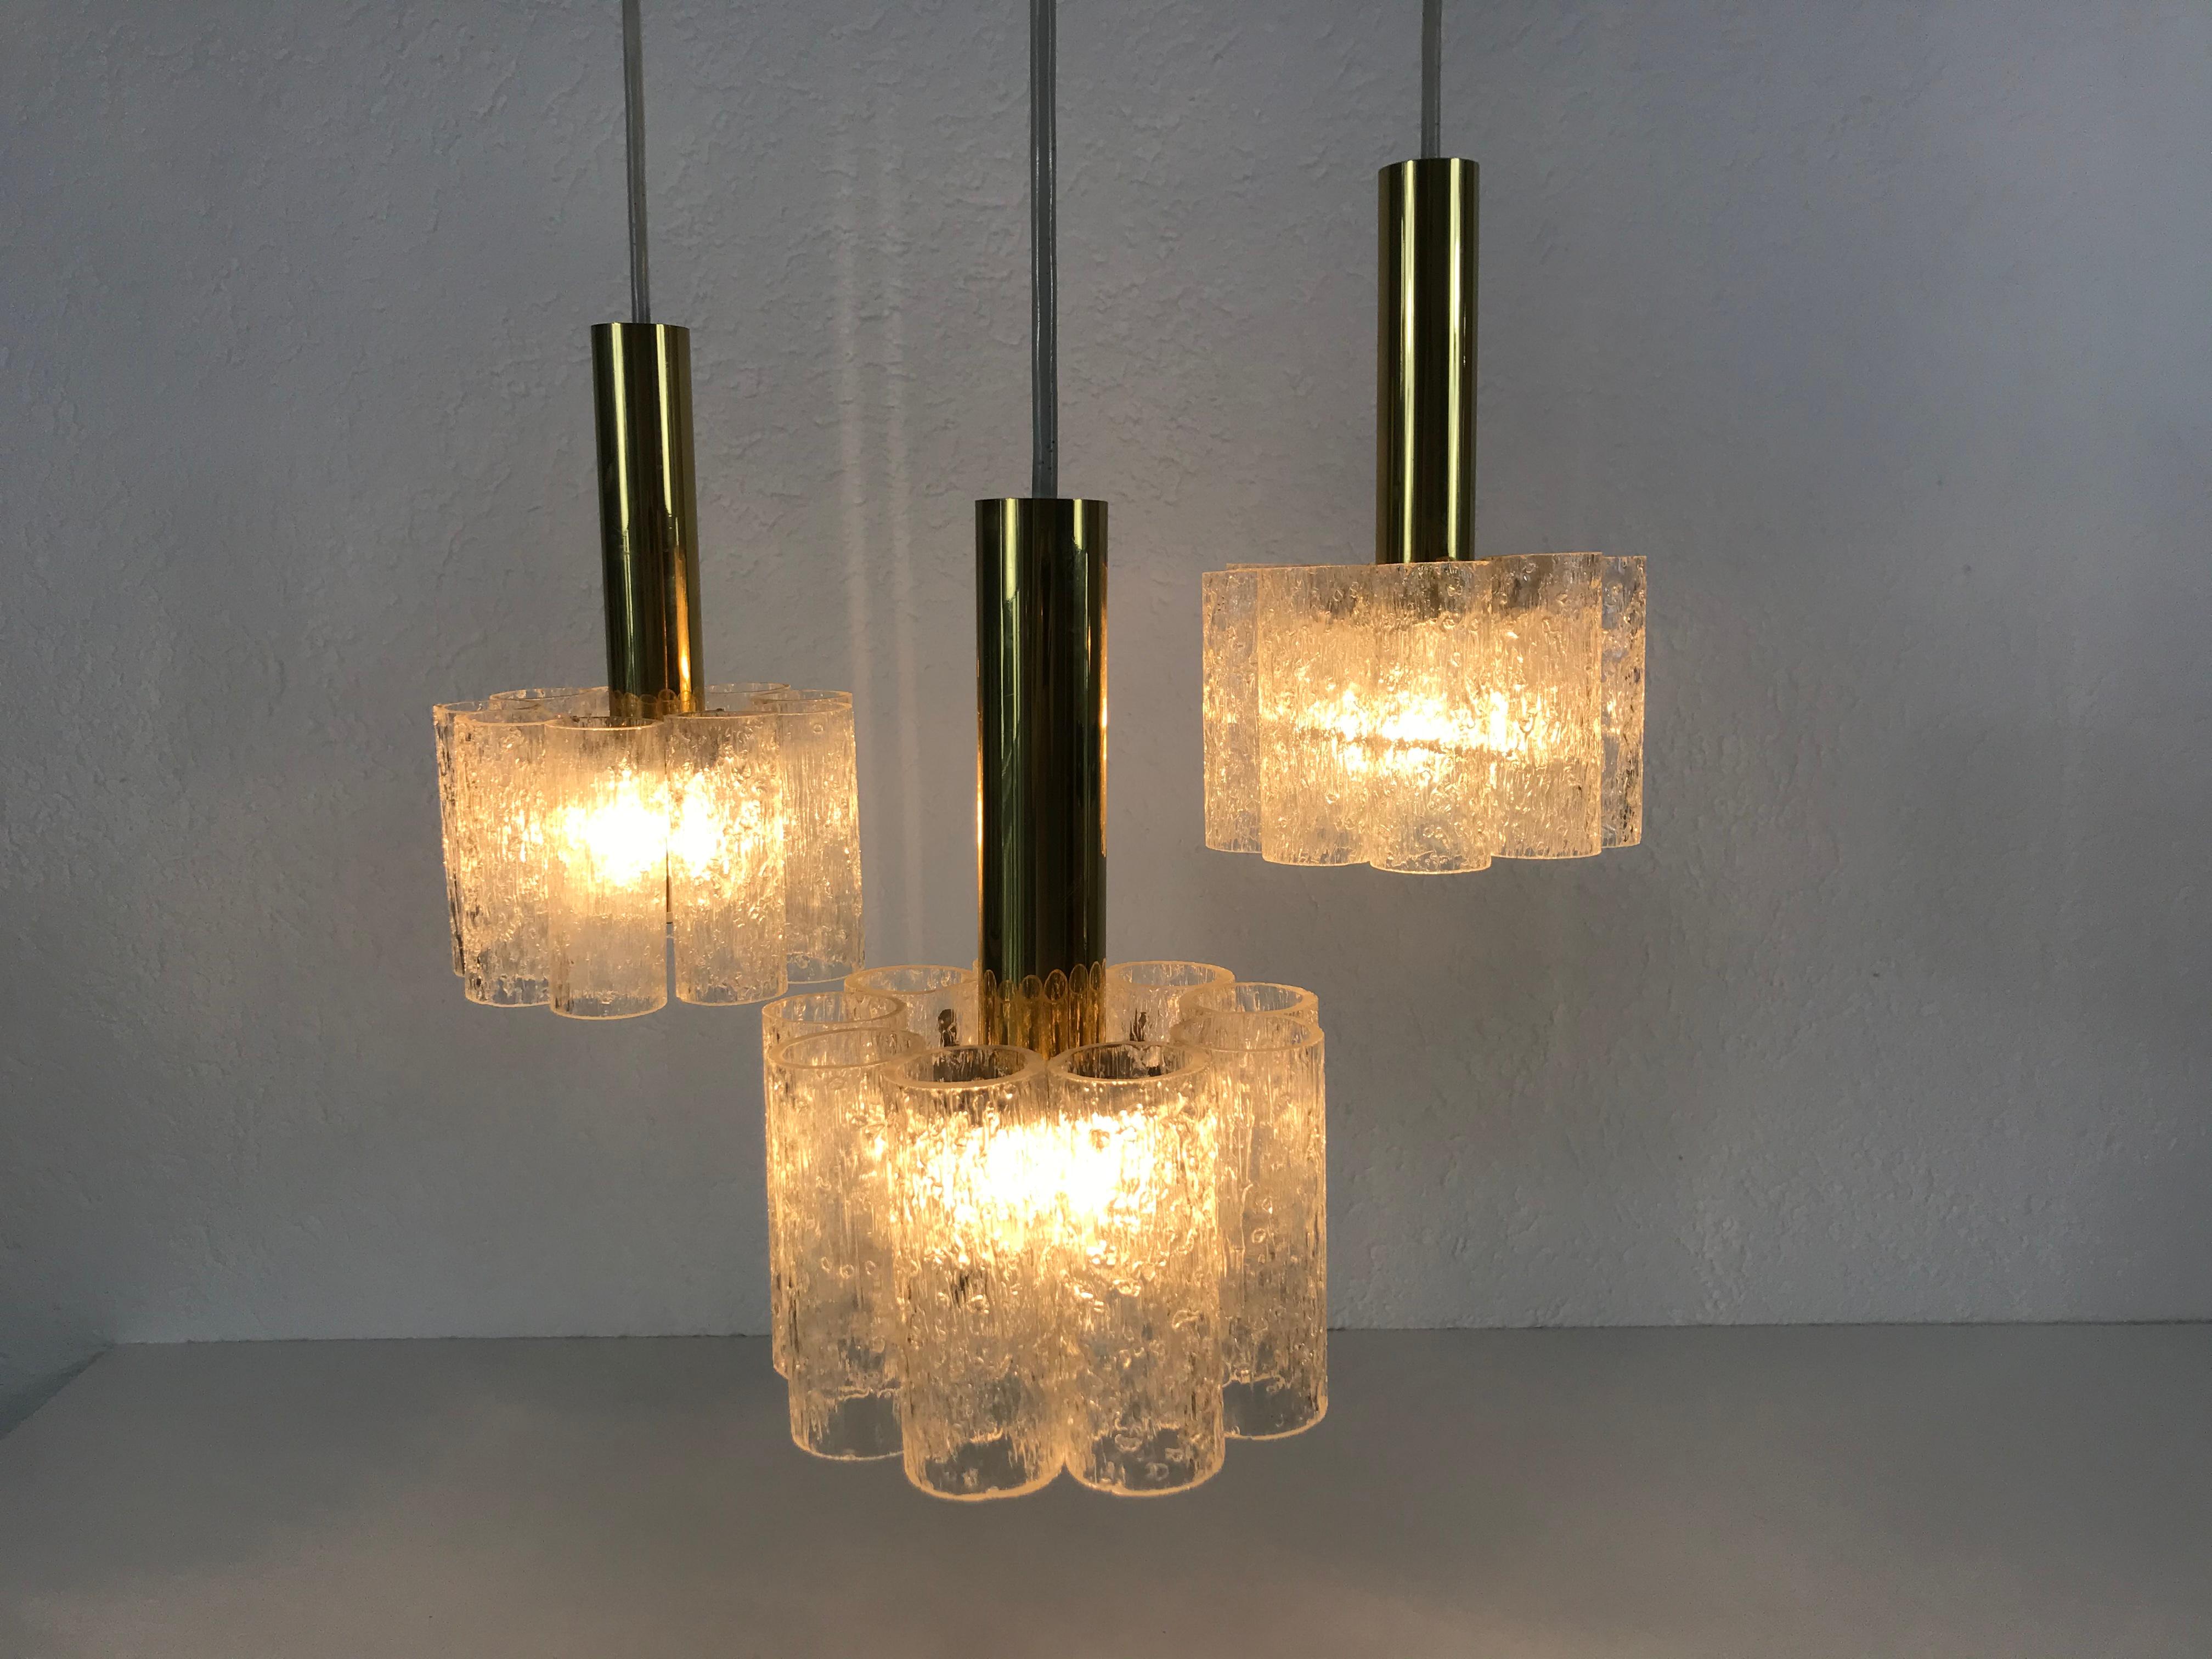 Doria Midcentury Crystal Ice Glass Cascade Pendant Lamp, Germany, 1960s For Sale 6